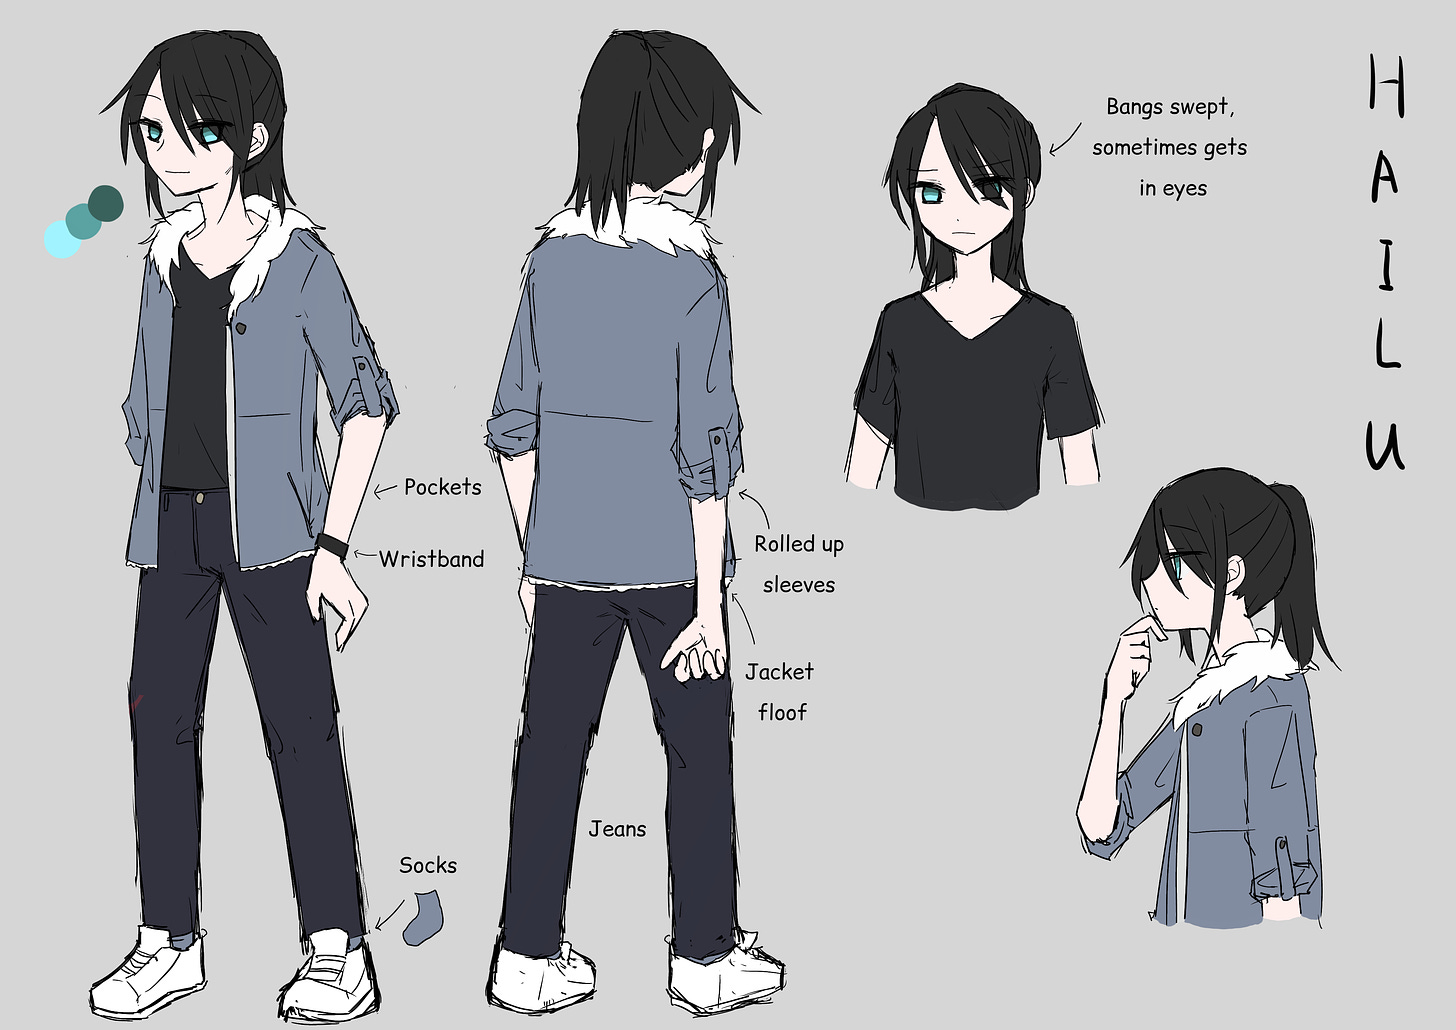 Character design sheet of Hailu: a girl with black hair in a ponytail, blue-green eyes. She is wearing a jacket with fur lining, sleeves rolled up midway. Underneath the jacket, which is open, she is wearing a black T shirt, dark blue jeans, and white sneakers.